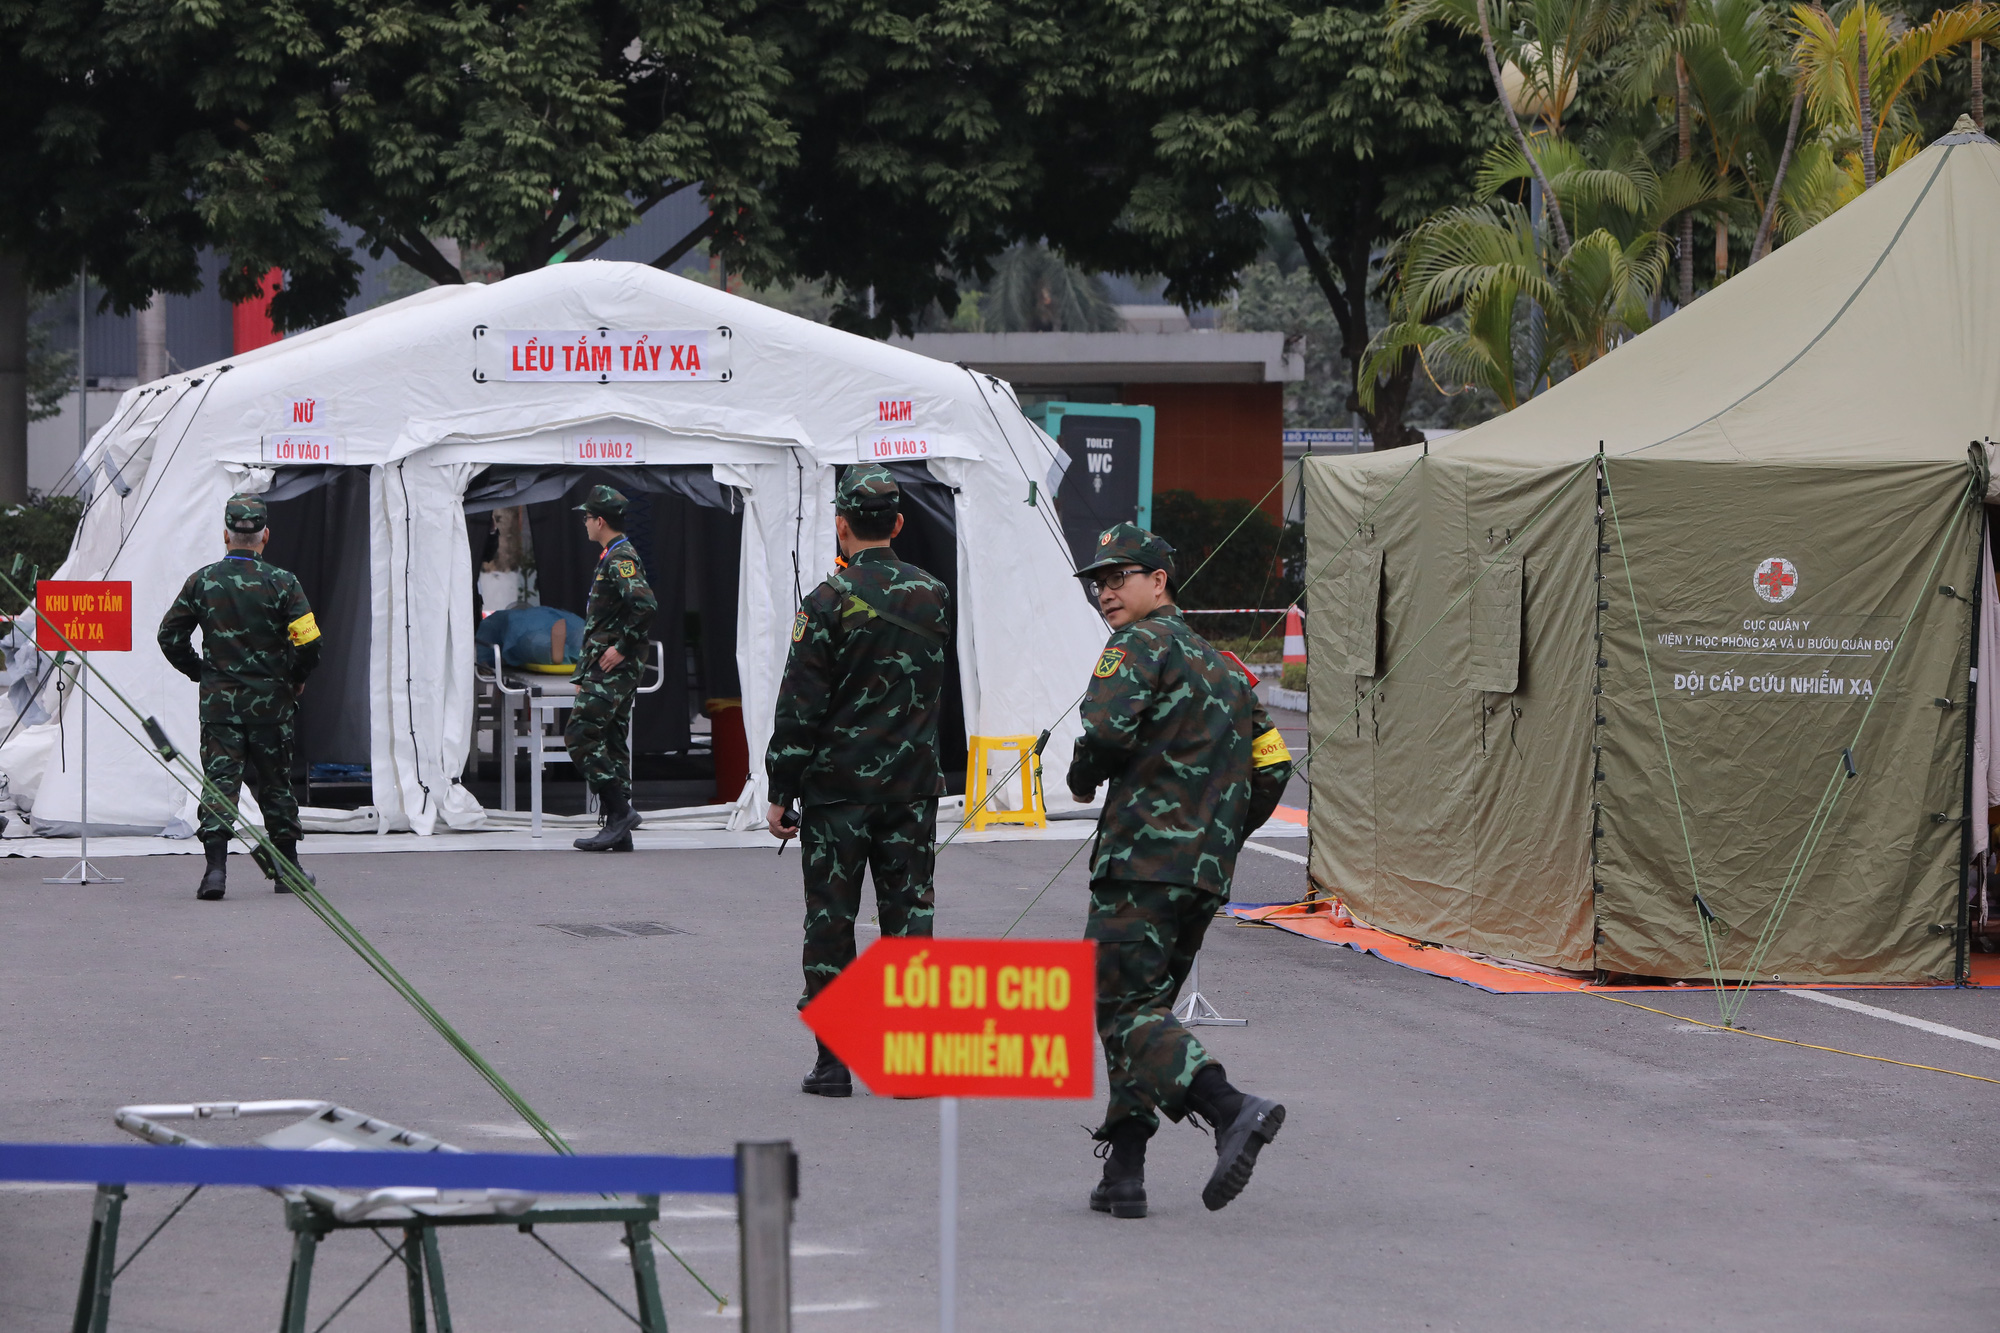 An area for radioactive contamination treatment is set up during an exercise to prepare for the National Party Congress in Hanoi, January 10, 2021. Photo: Viet Dung / Tuoi Tre